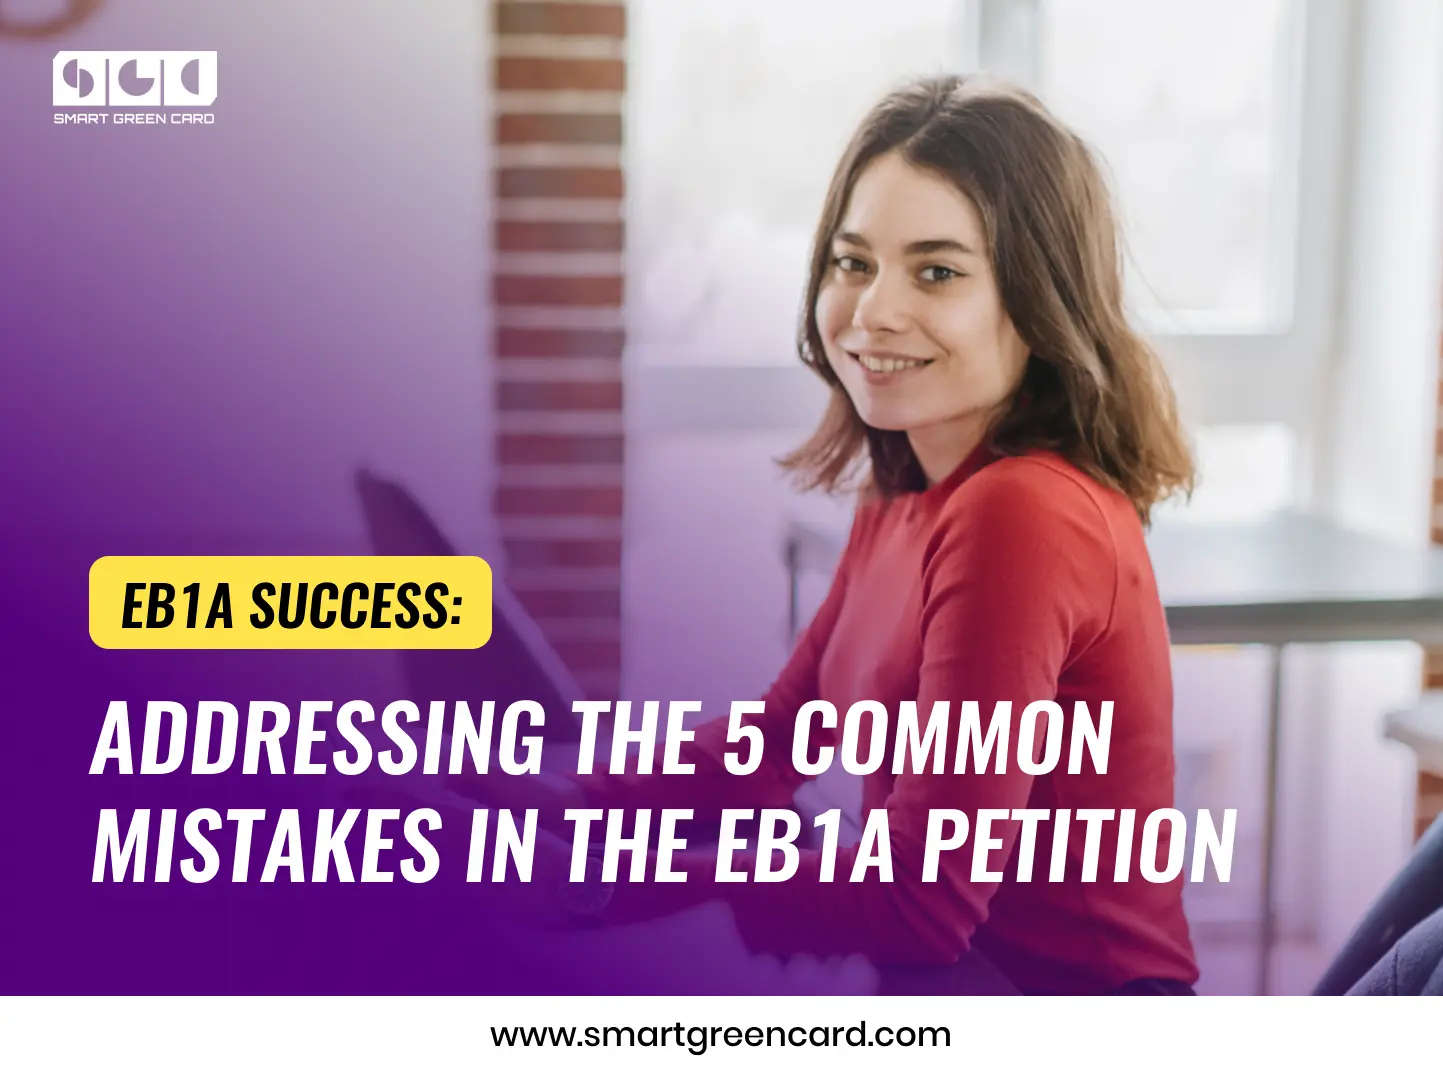 Addressing the 5 Common Mistakes in the EB1A Petition